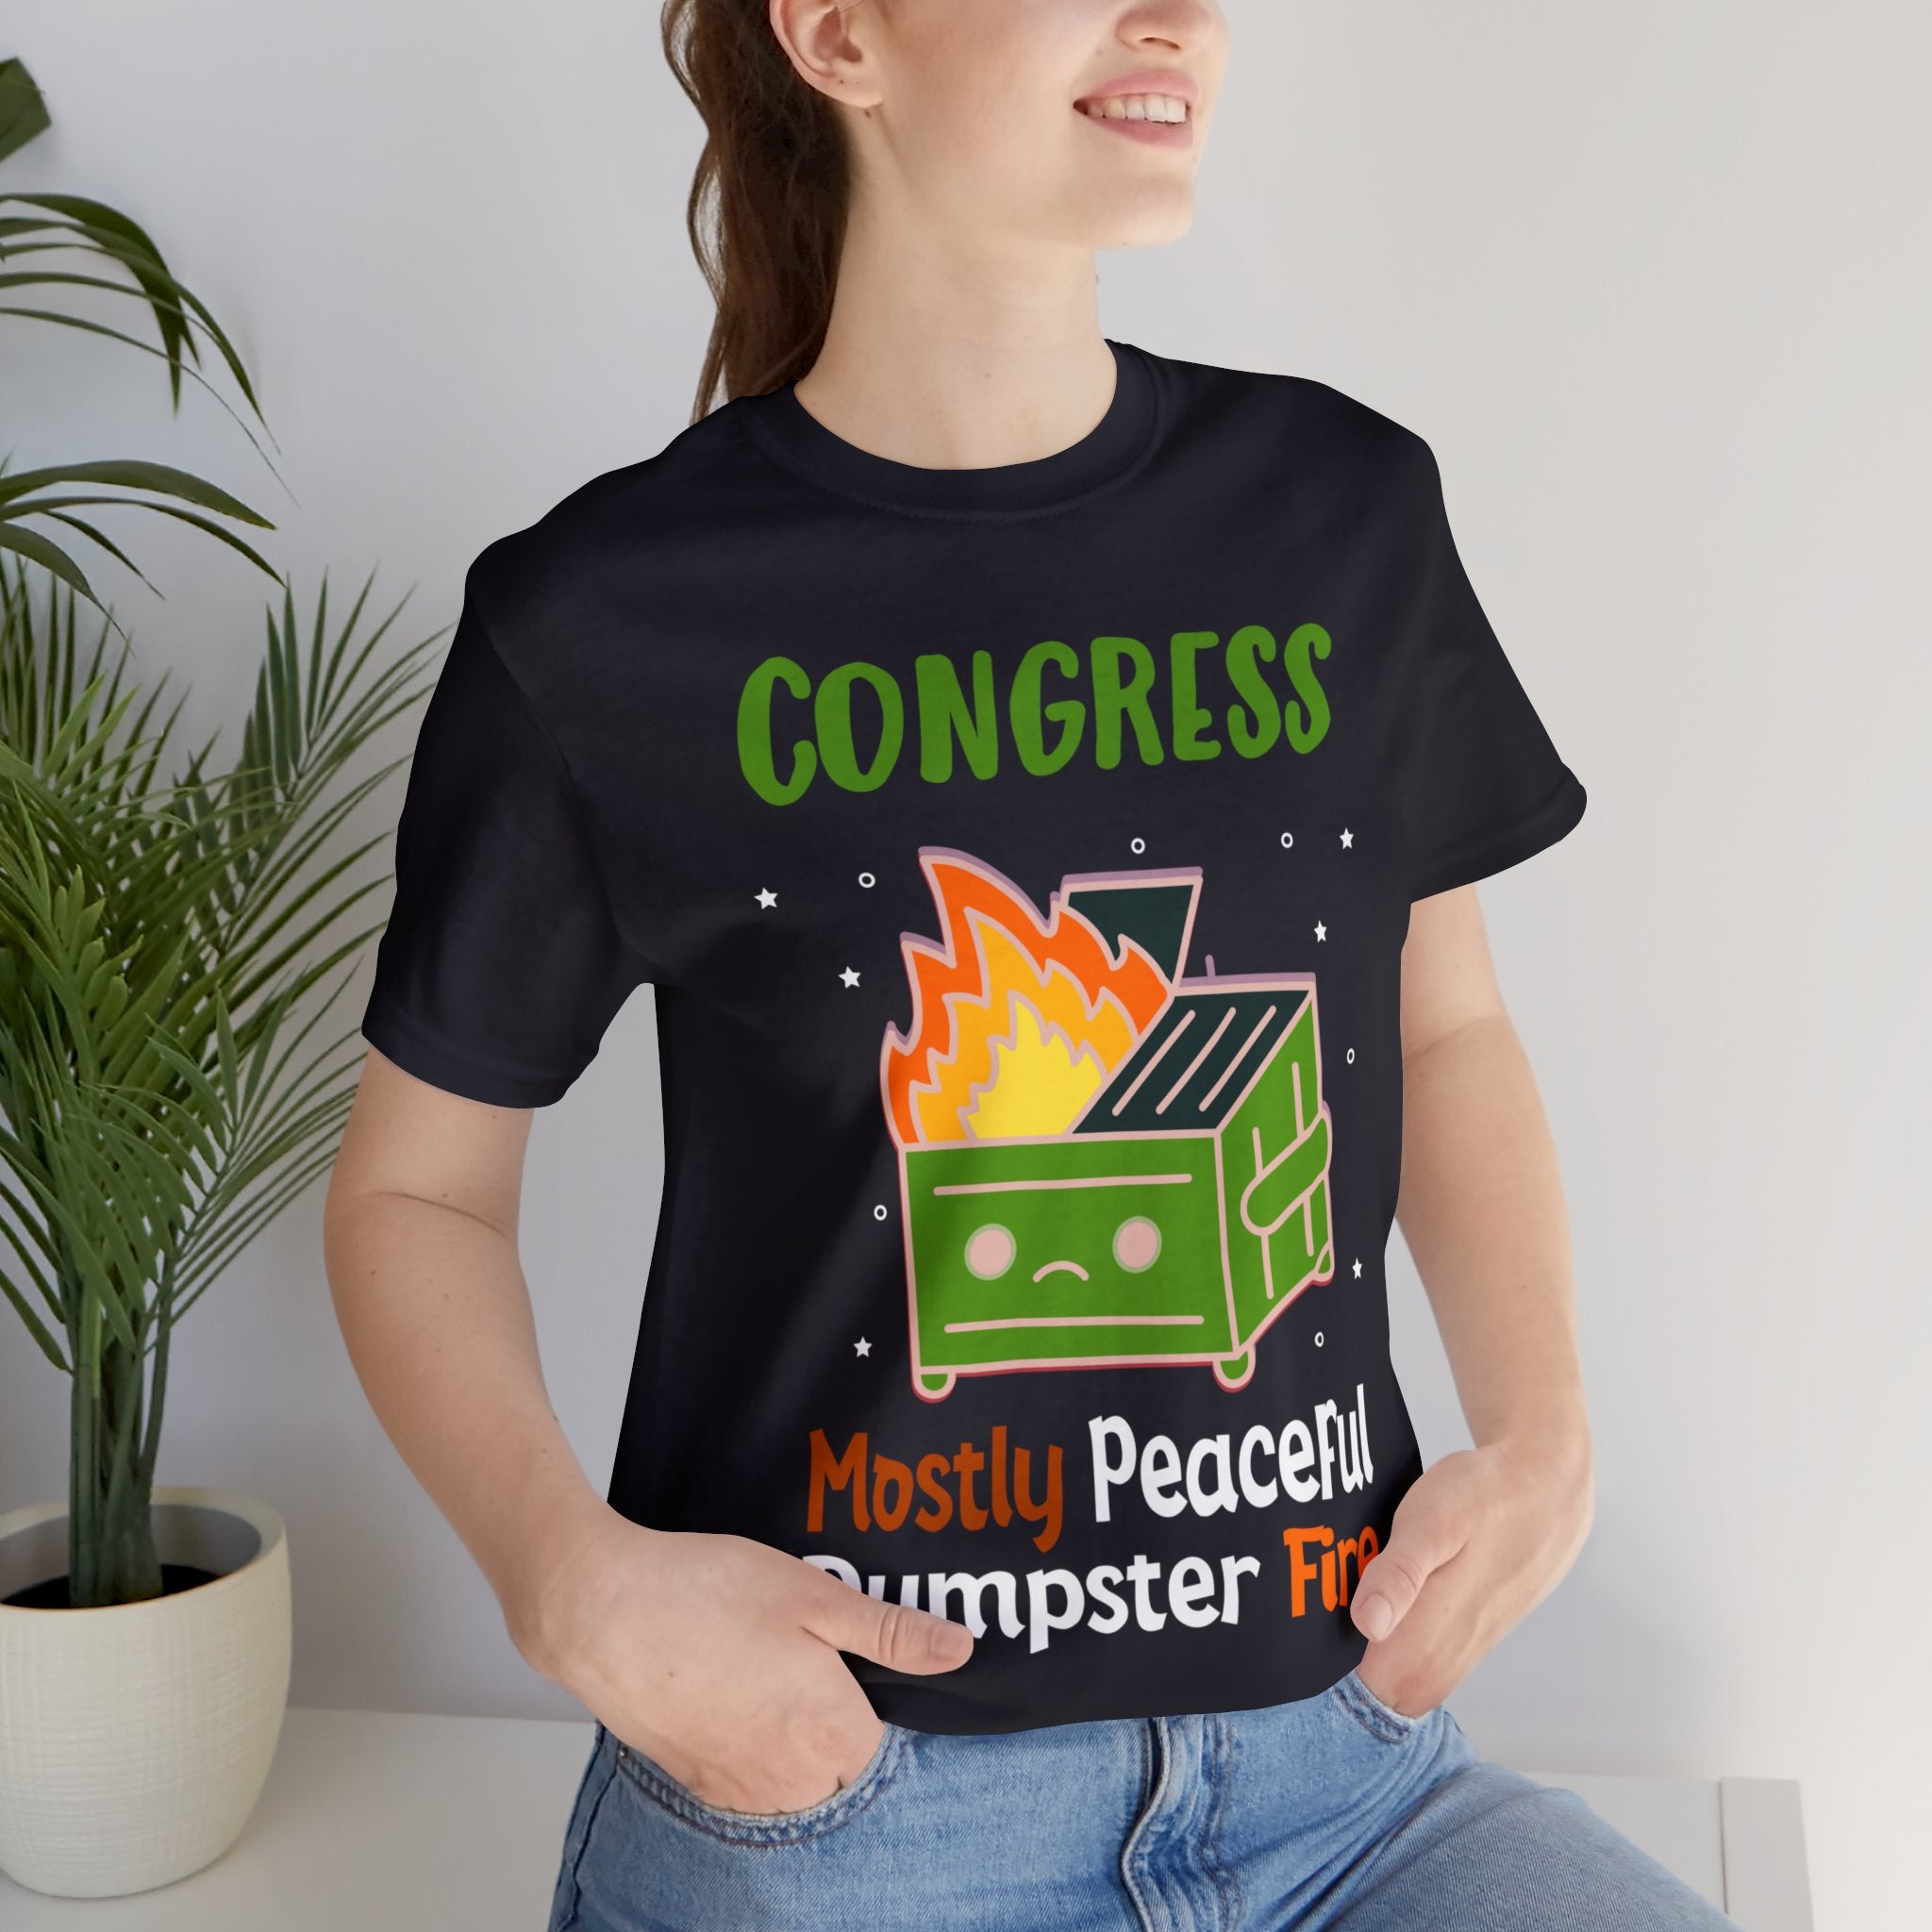 Congress - Mostly Peaceful Dumpster Fire